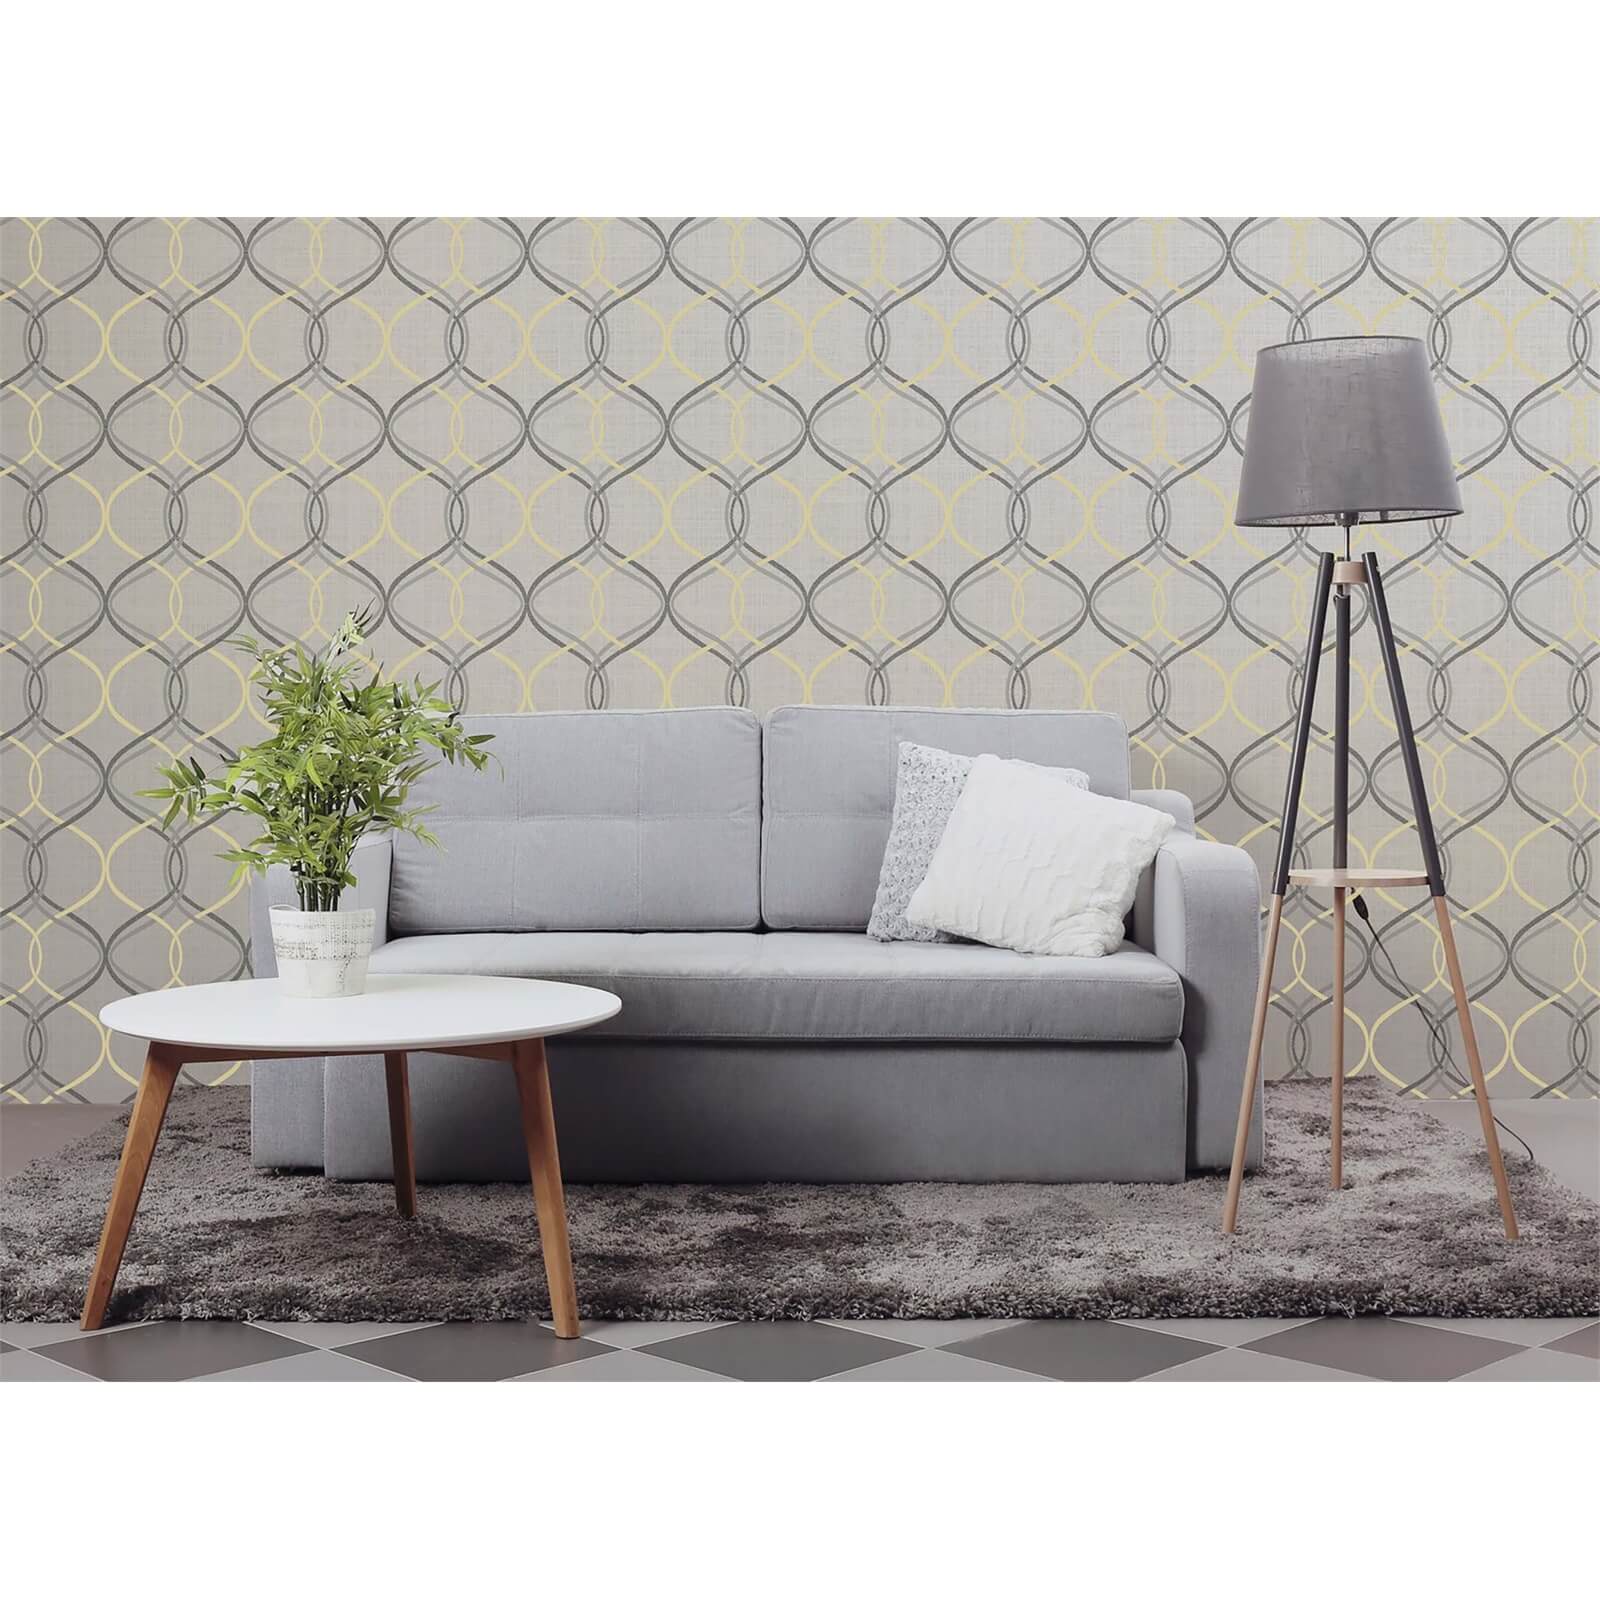 Arthouse Twisted Ogee Grey Gold Wallpaper